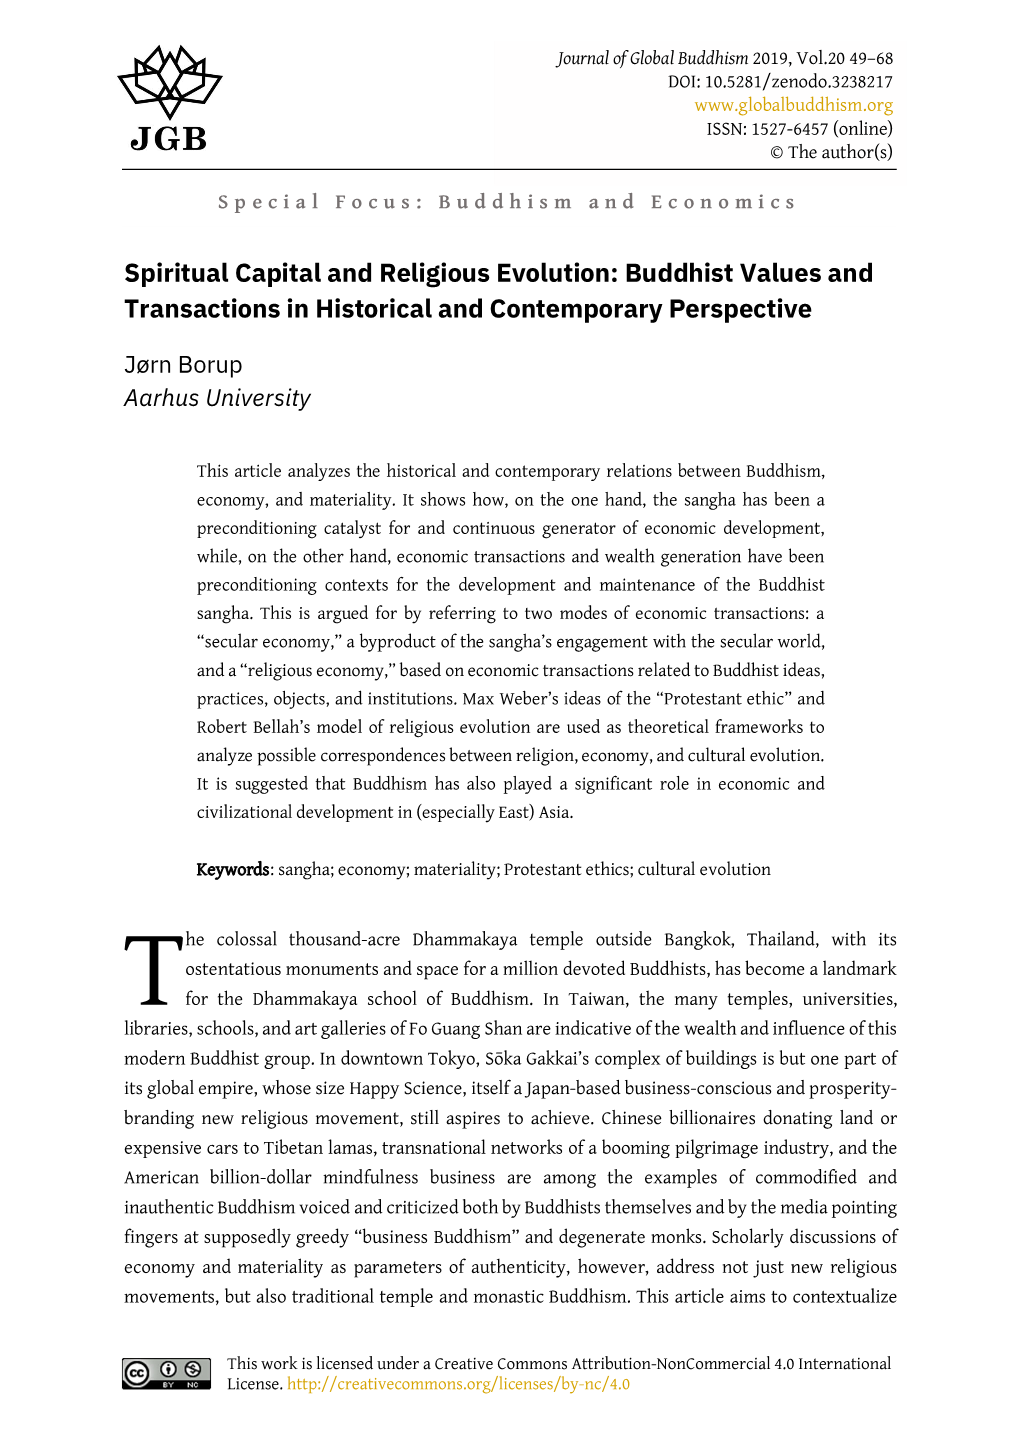 Spiritual Capital and Religious Evolution: Buddhist Values and Transactions in Historical and Contemporary Perspective